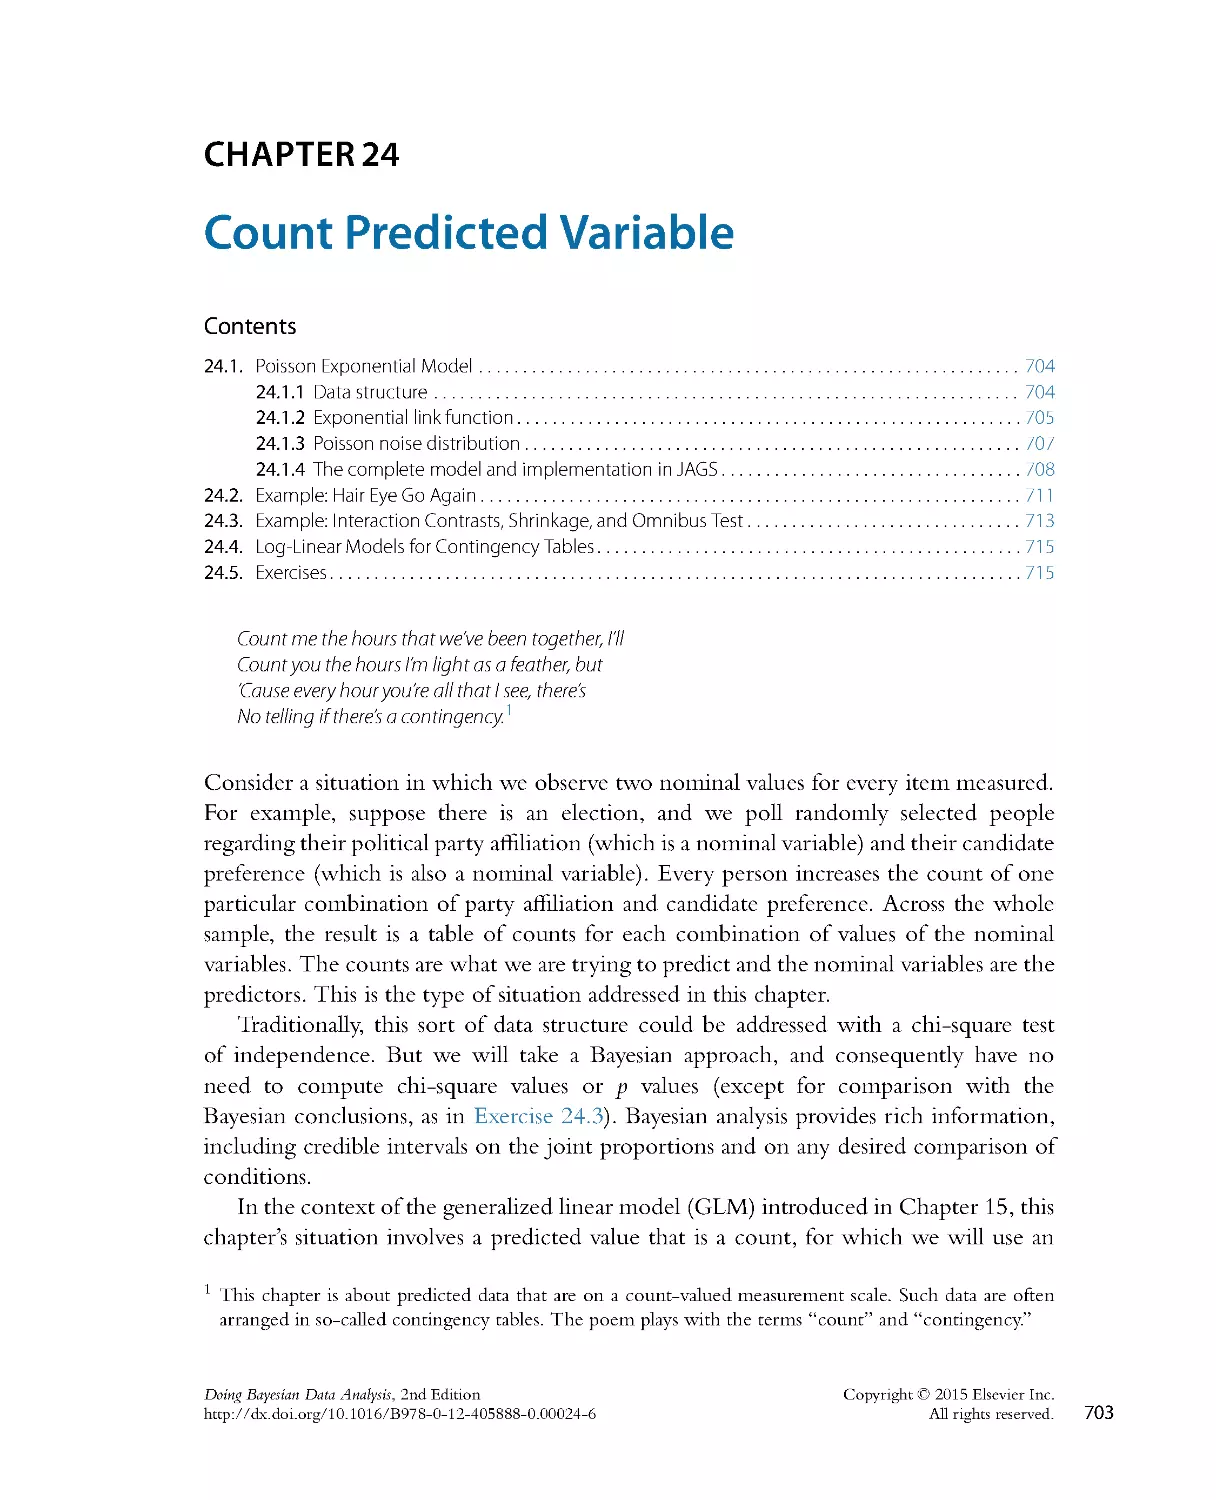 30. Chapter-24-Count-Predicted-Variable_2015_Doing-Bayesian-Data-Analysis-Second-Edition-